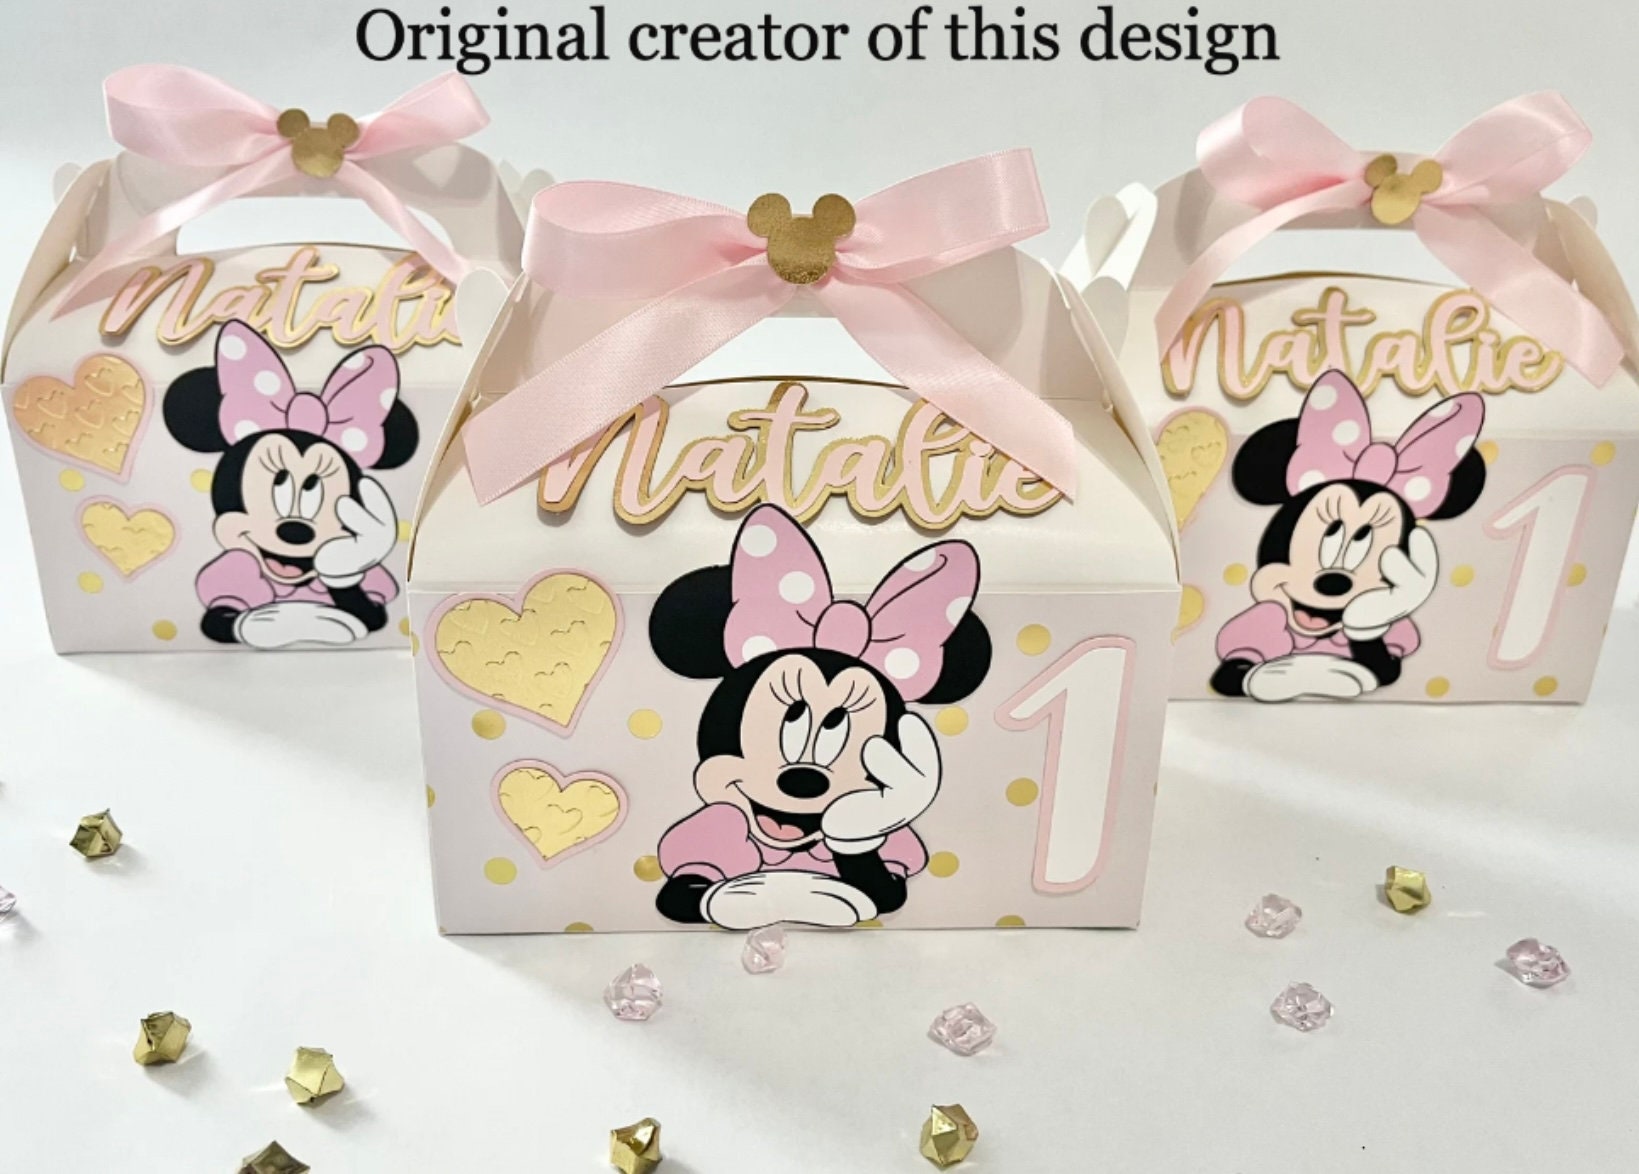 Minnie Mouse Birthday Favor Bags, Birthday Bags, White Gift Bags, Treat  Bags, White Bags With Disney Theme Set of 10 Bags 